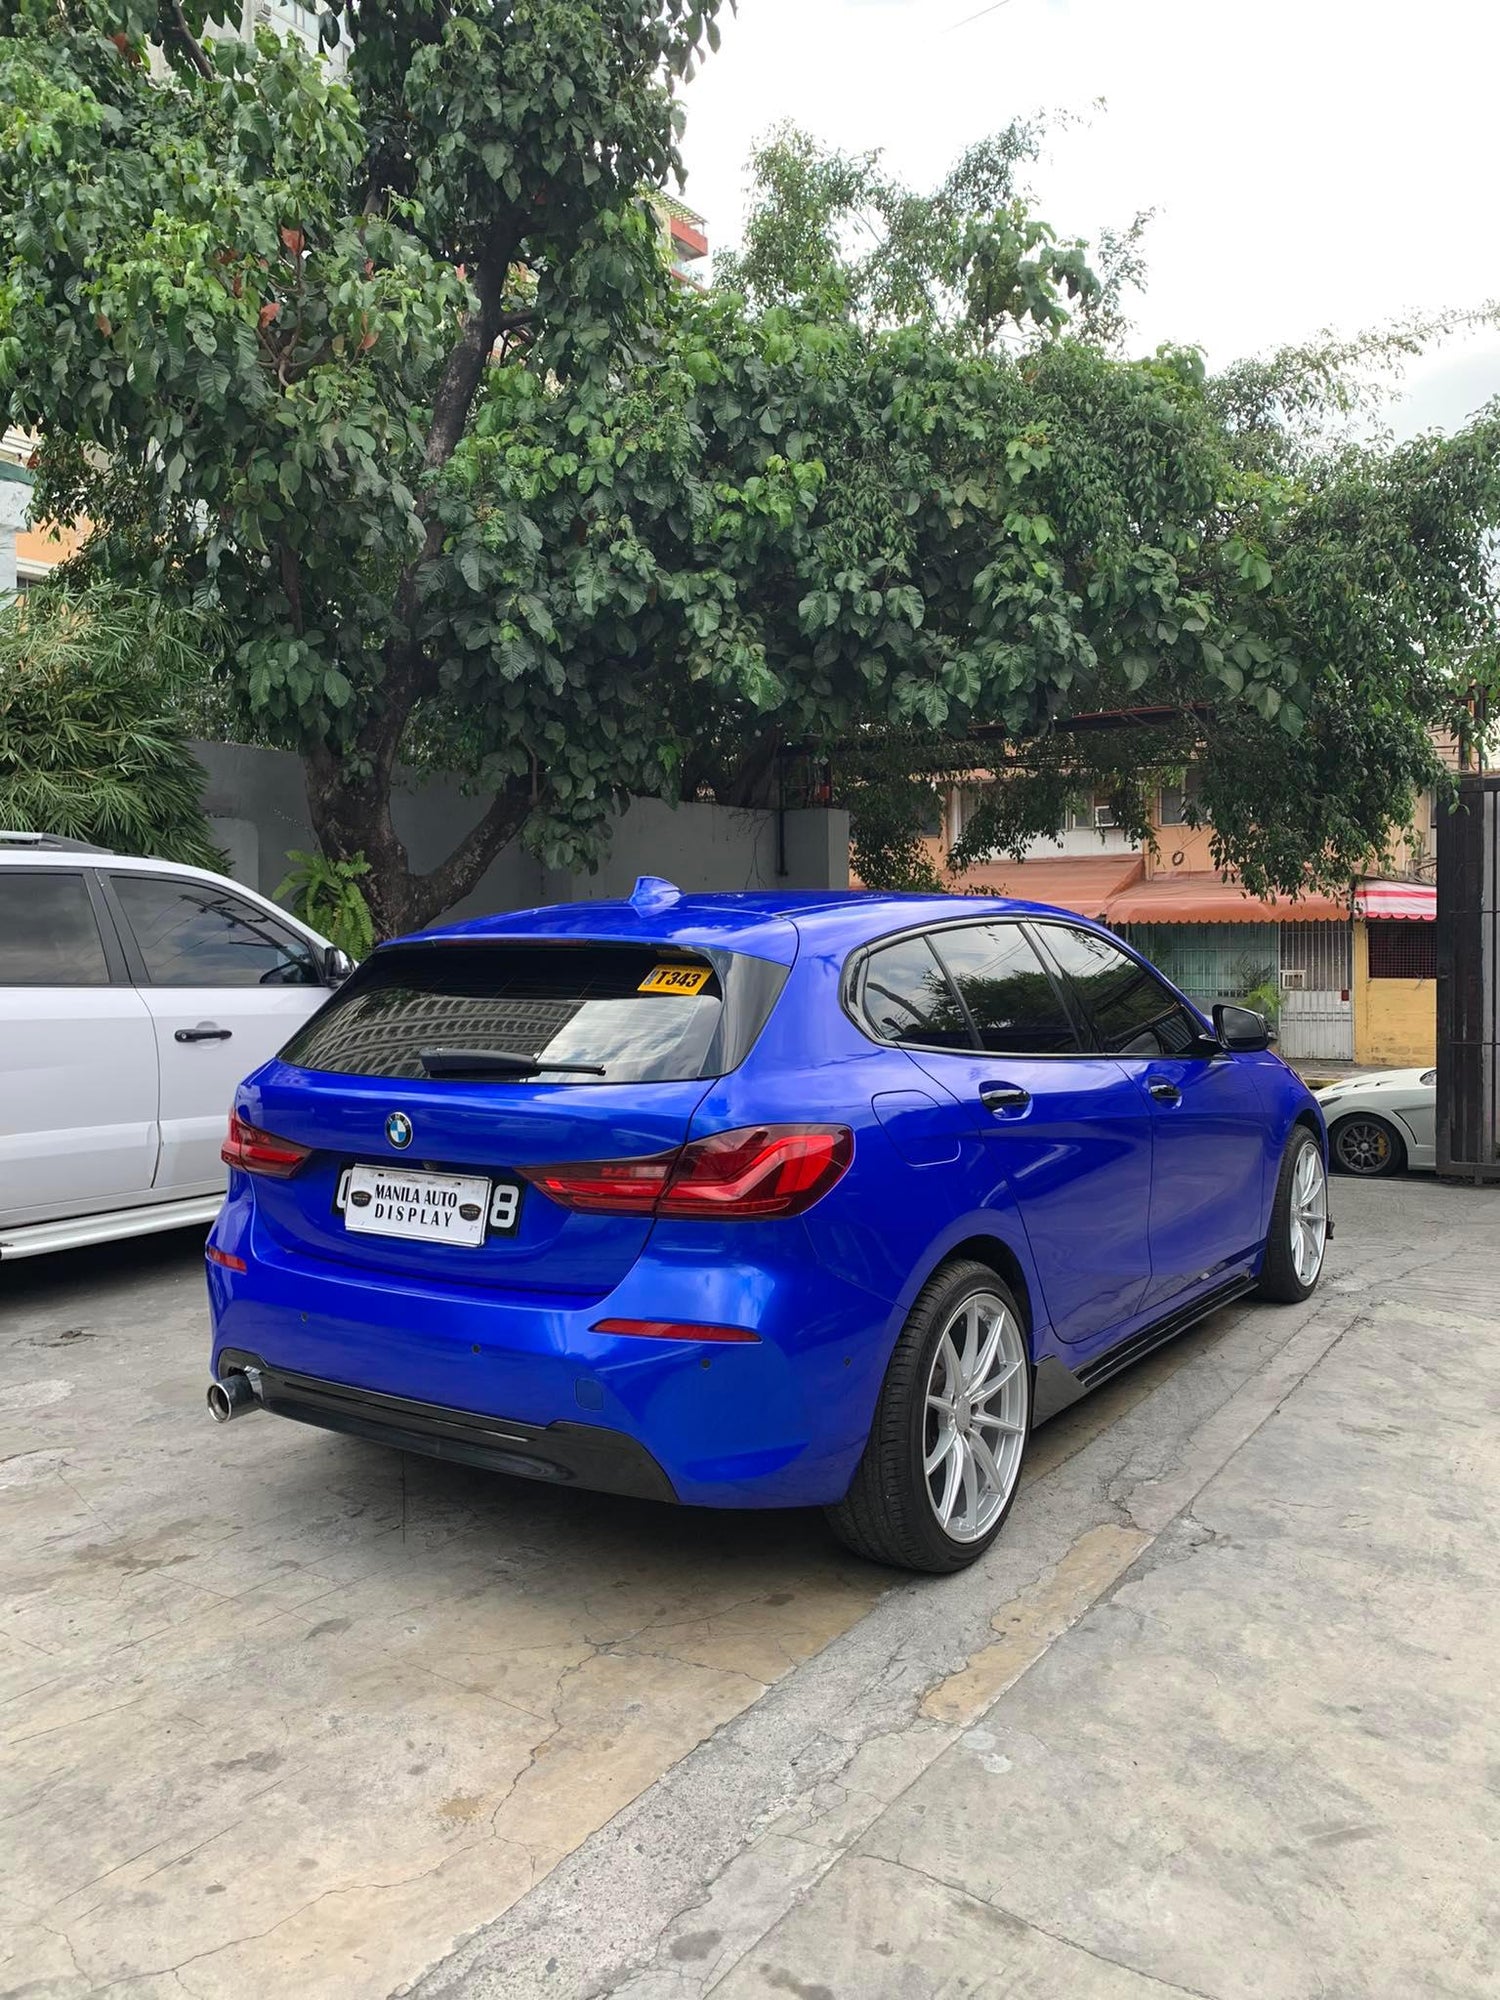 2022 ACQ 2020MY BMW 118i HATCHBACK GAS AUTOMATIC TRANSMISSION (6T KMS ONLY!) | Secondhand Used Cars for Sale at Manila Auto Display.